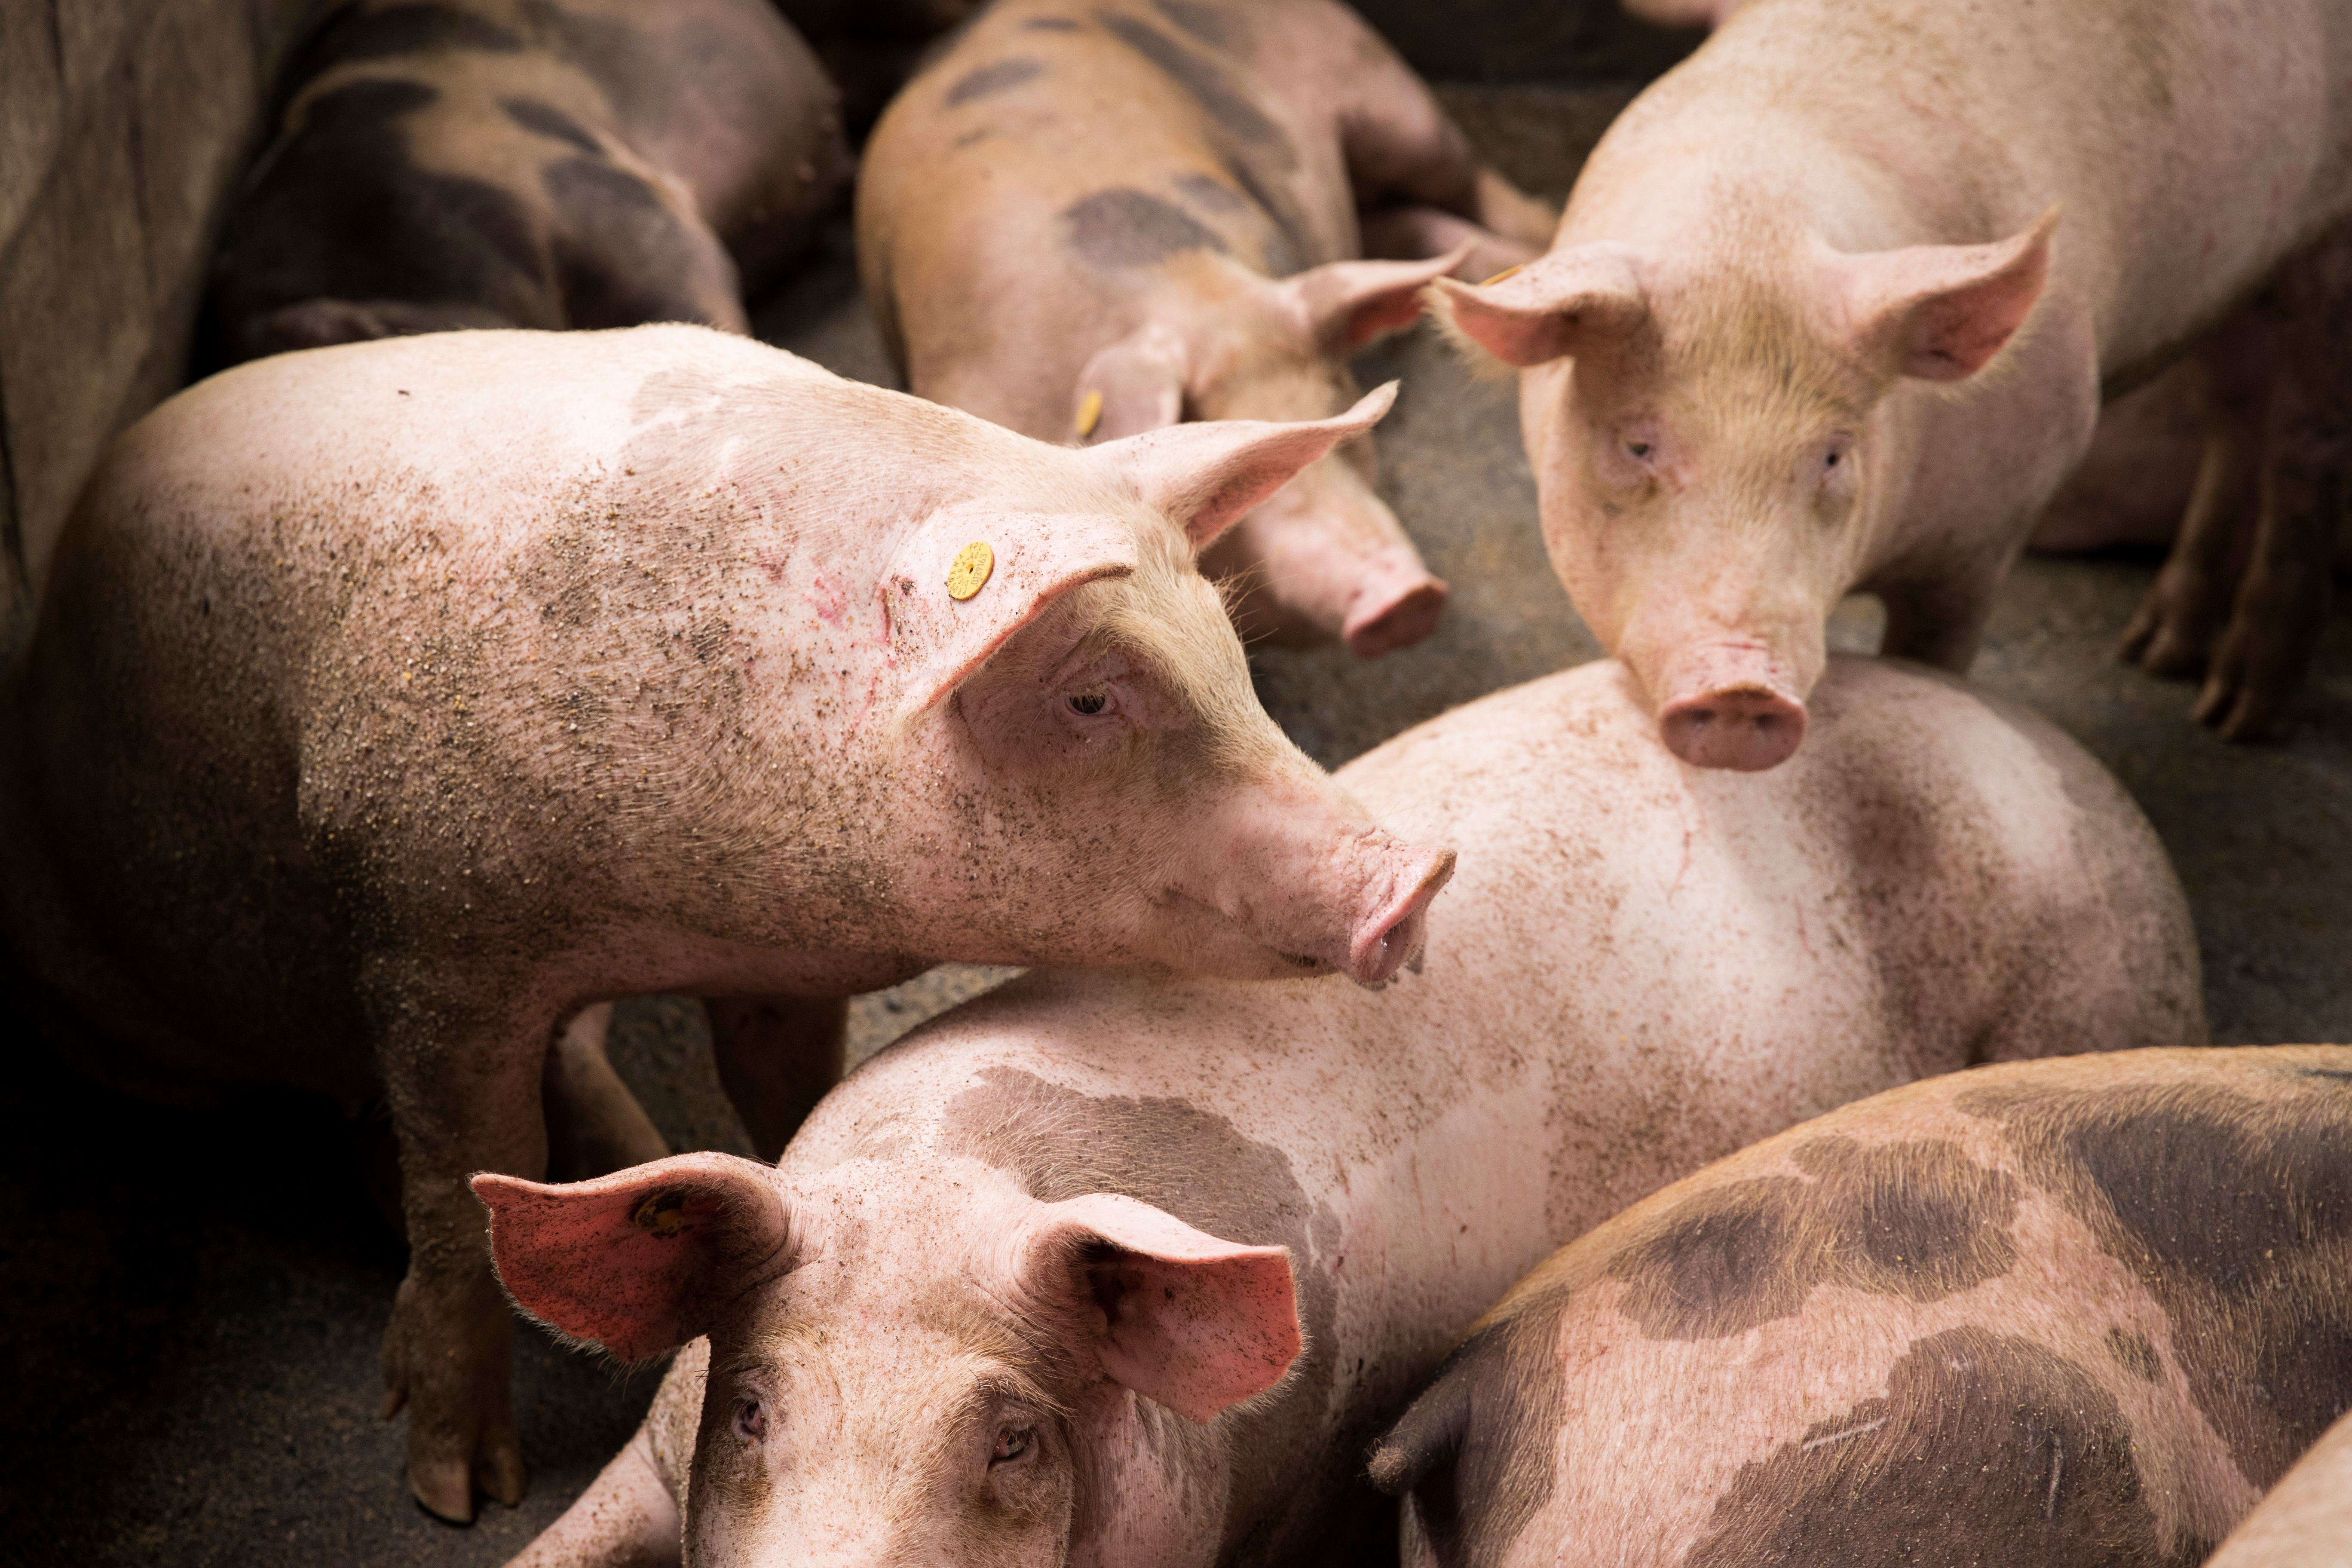 Photograph of pigs in the corral of a farm (Photo: EFE)